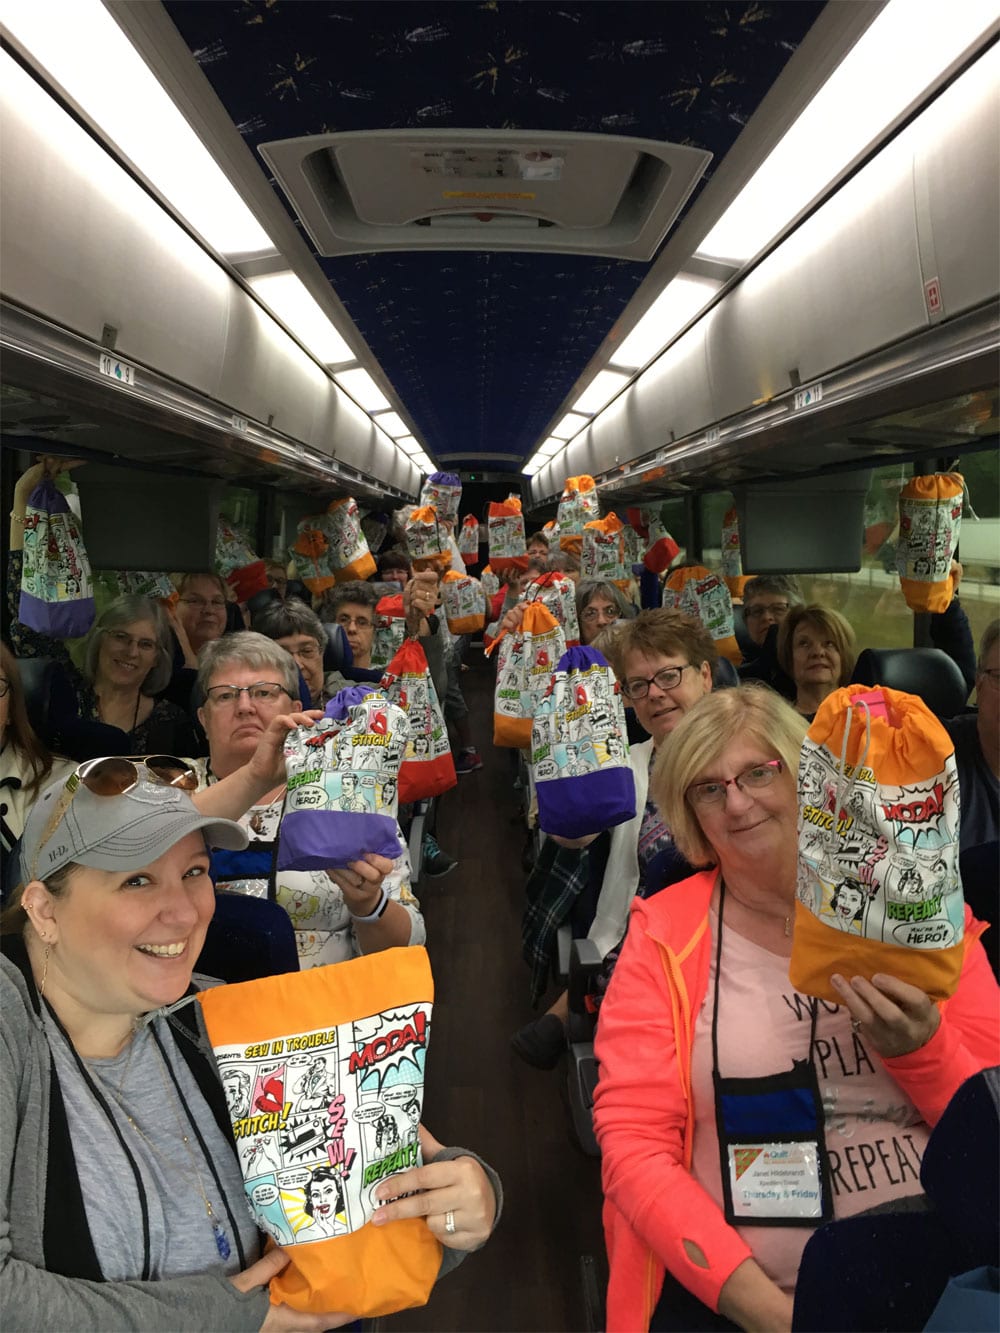 A group of people on a train holding bags.